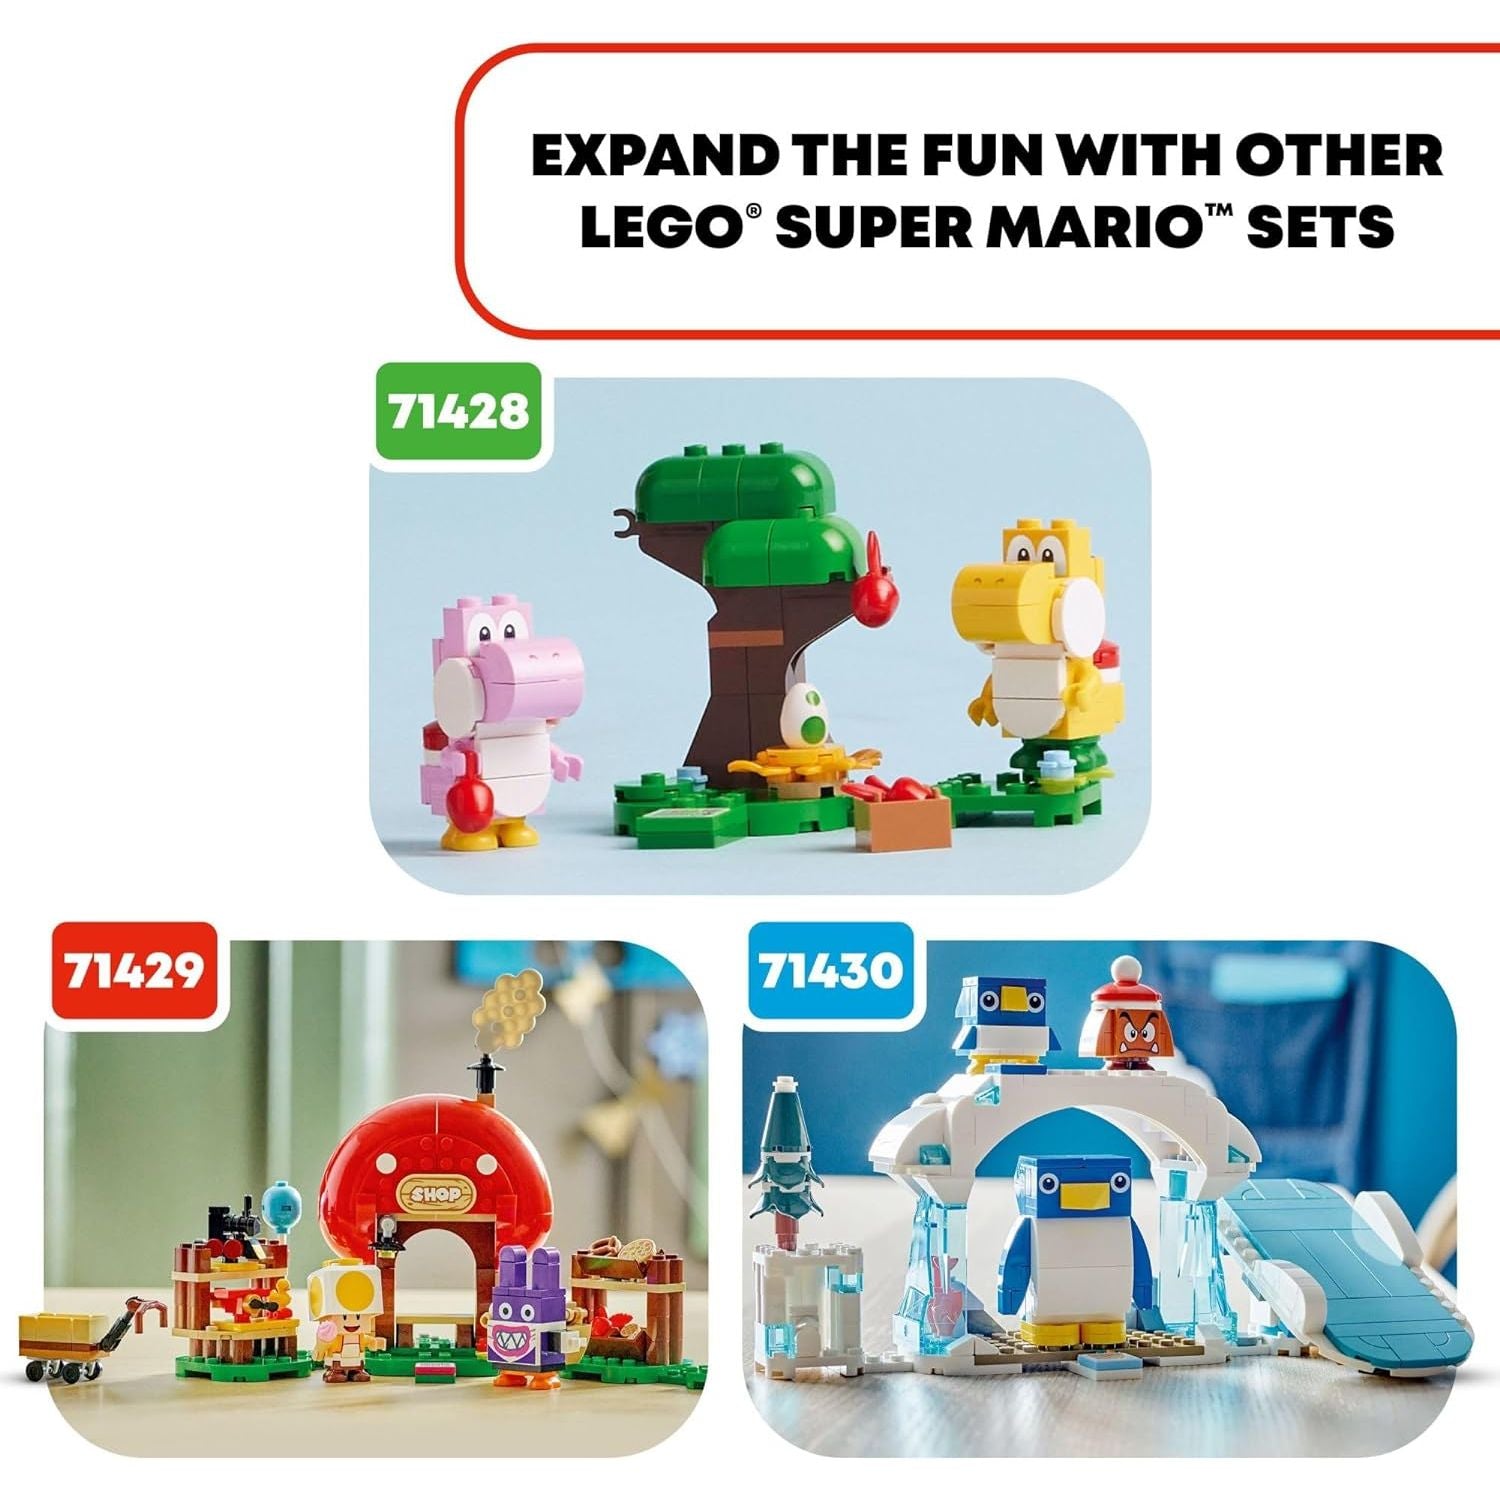 LEGO 71428 Super Mario Yoshis’ Egg-cellent Forest Expansion Set, Super Mario Collectible Toy for Kids, 2 Brick-Built Characters.